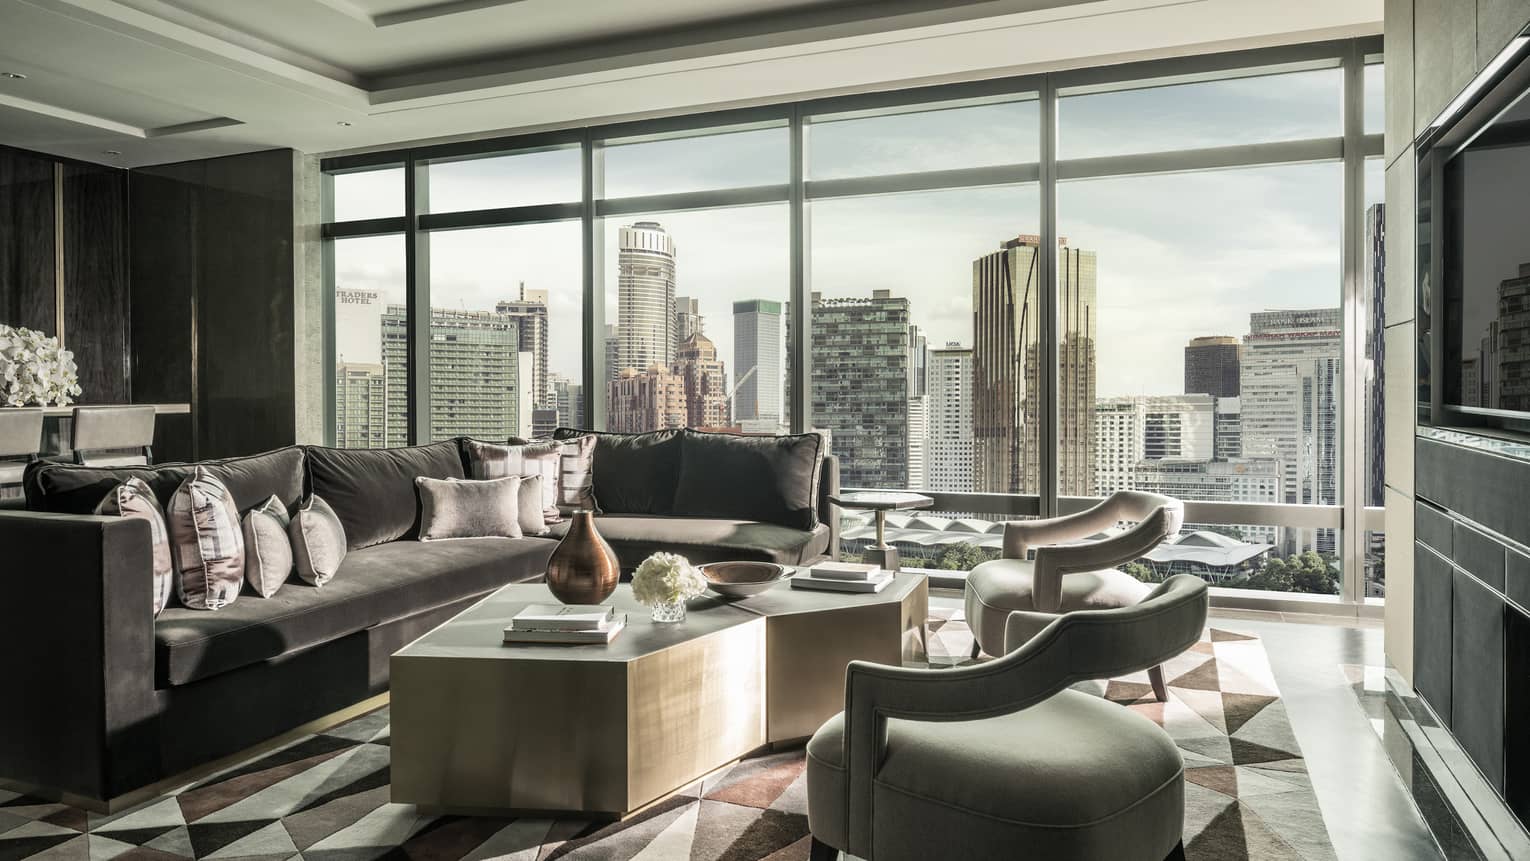 Sunny Presidential Suite seating area by floor-to-ceiling windows